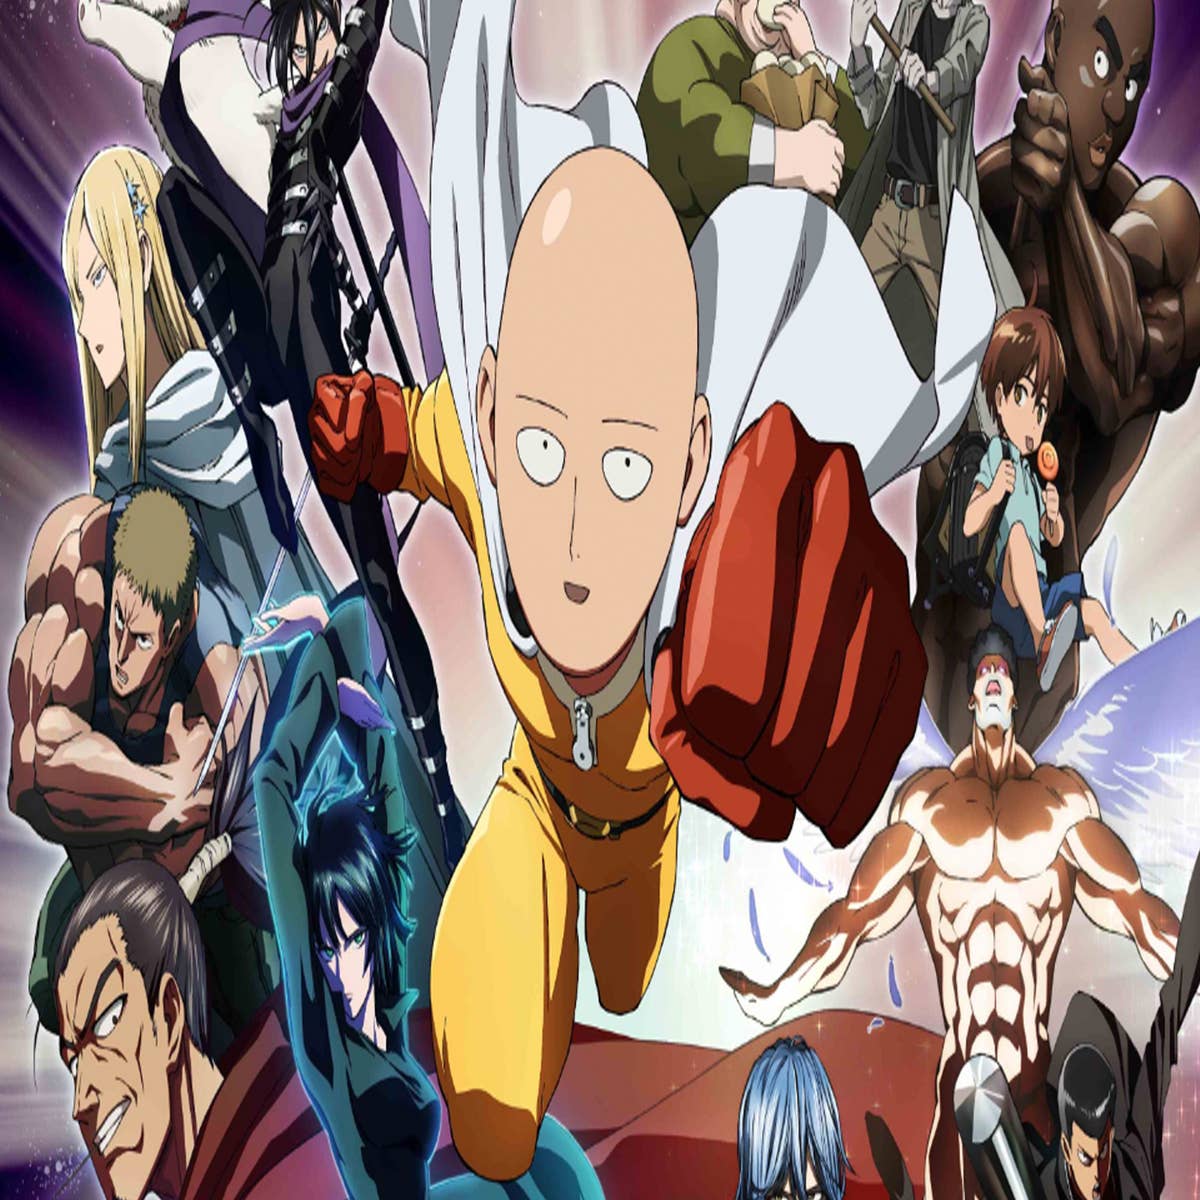 One Punch Man Season 3: Release, Cast and Everything We Know So Far